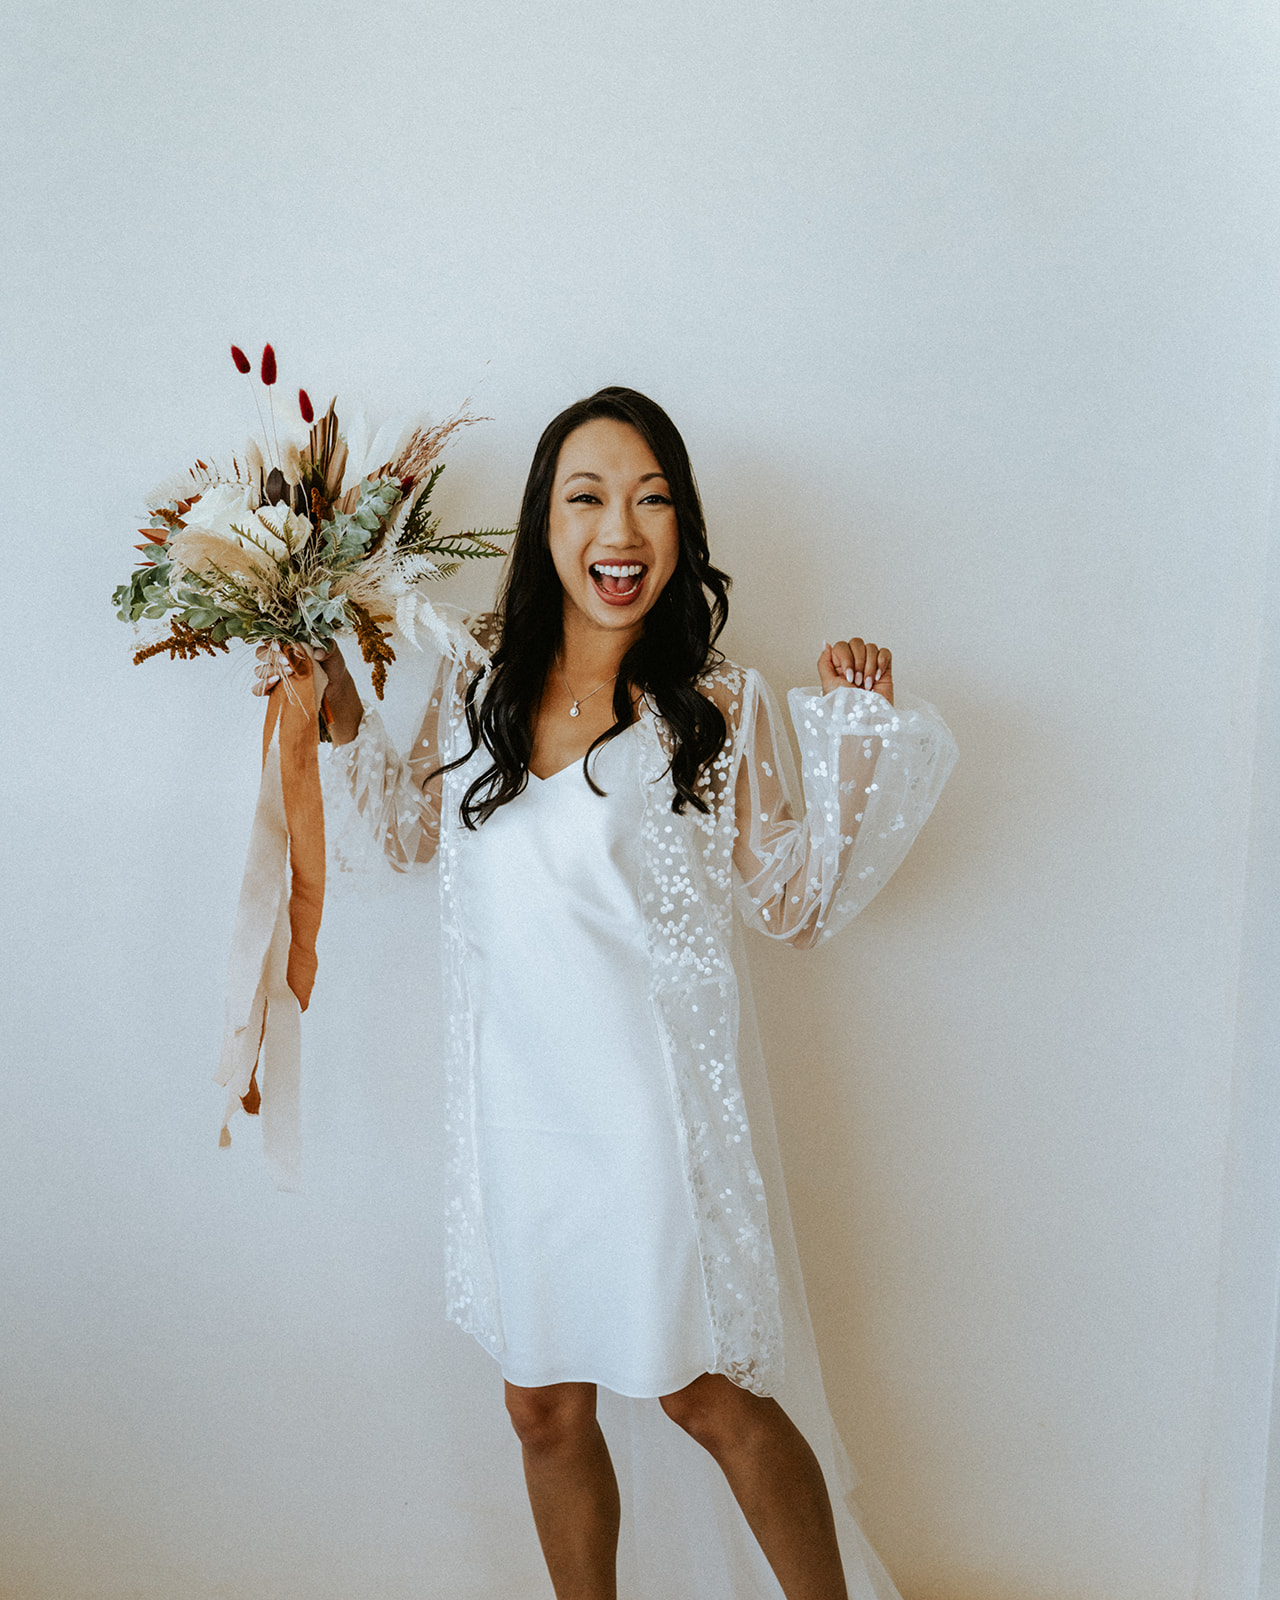 Bride is so hyped for her wedding day